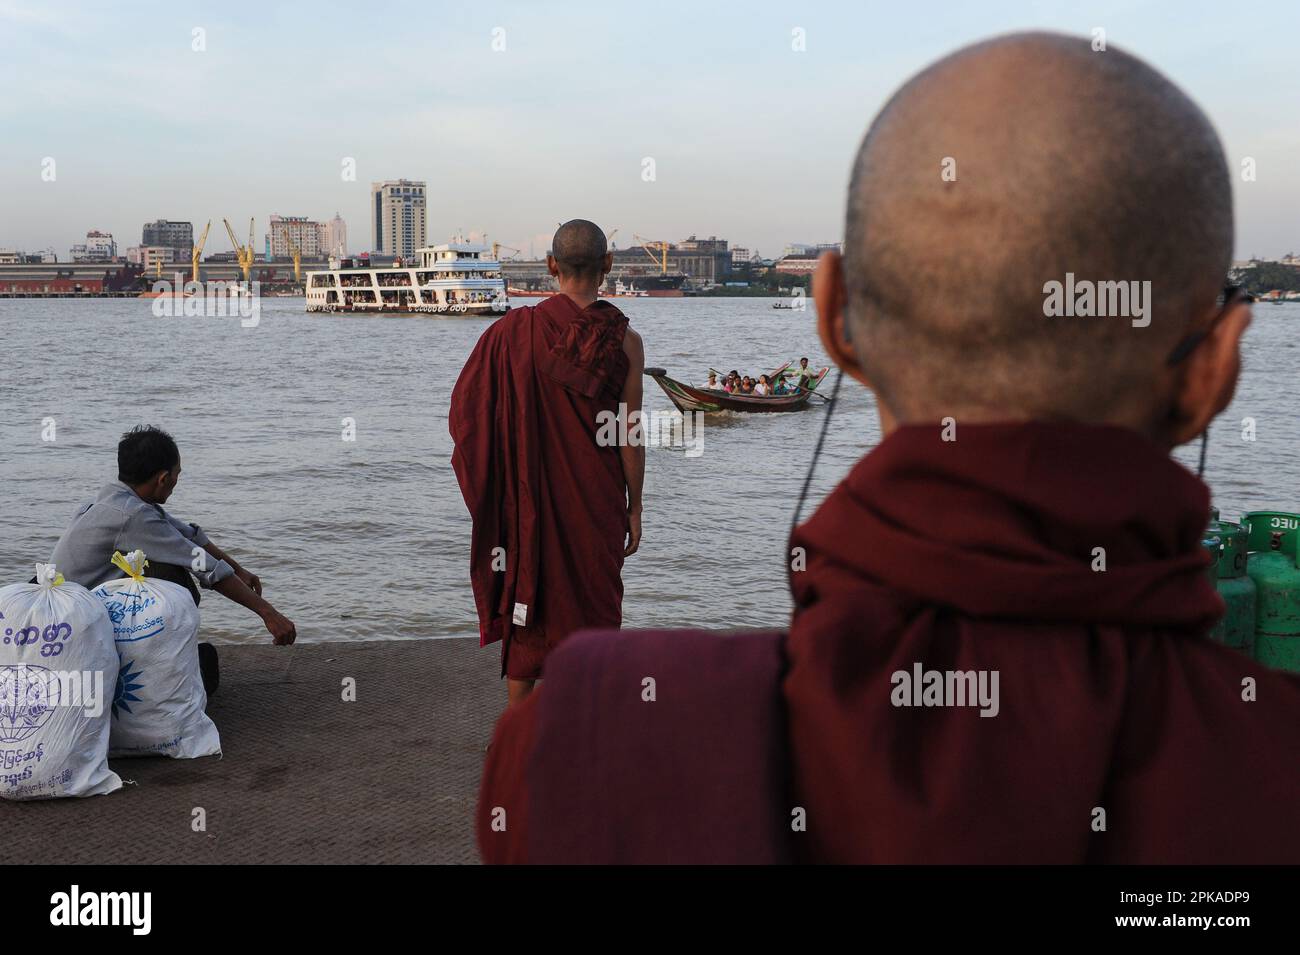 22.11.2013, Myanmar, , Yangon - Buddhist monks wait for ferries and river taxis on the southern bank of the Yangon River, while the former capital's b Stock Photo